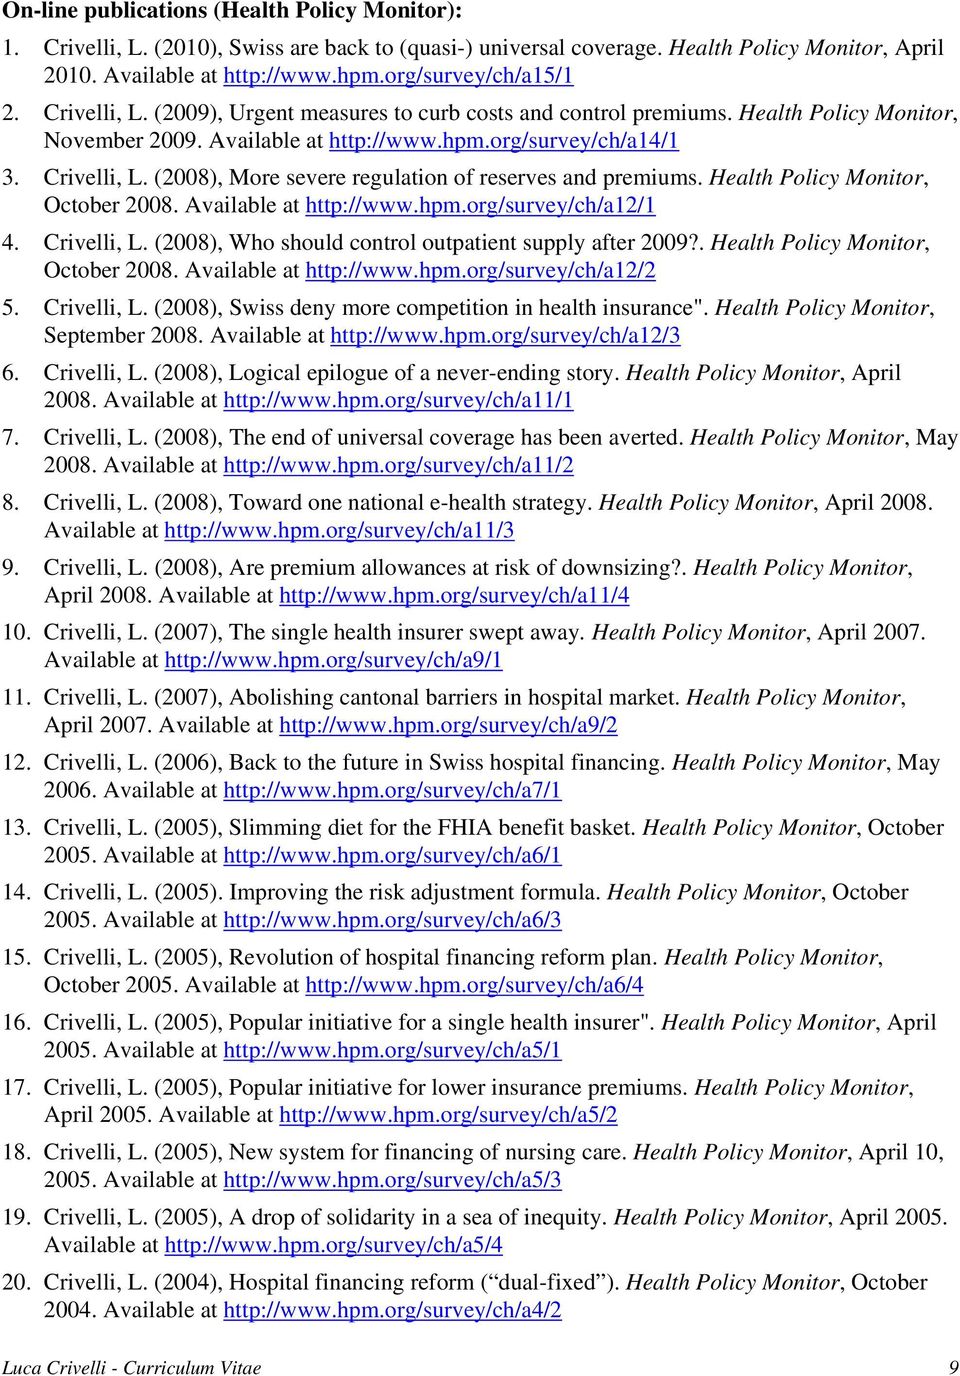 Health Policy Monitor, October 2008. Available at http://www.hpm.org/survey/ch/a12/1 4. Crivelli, L. (2008), Who should control outpatient supply after 2009?. Health Policy Monitor, October 2008.